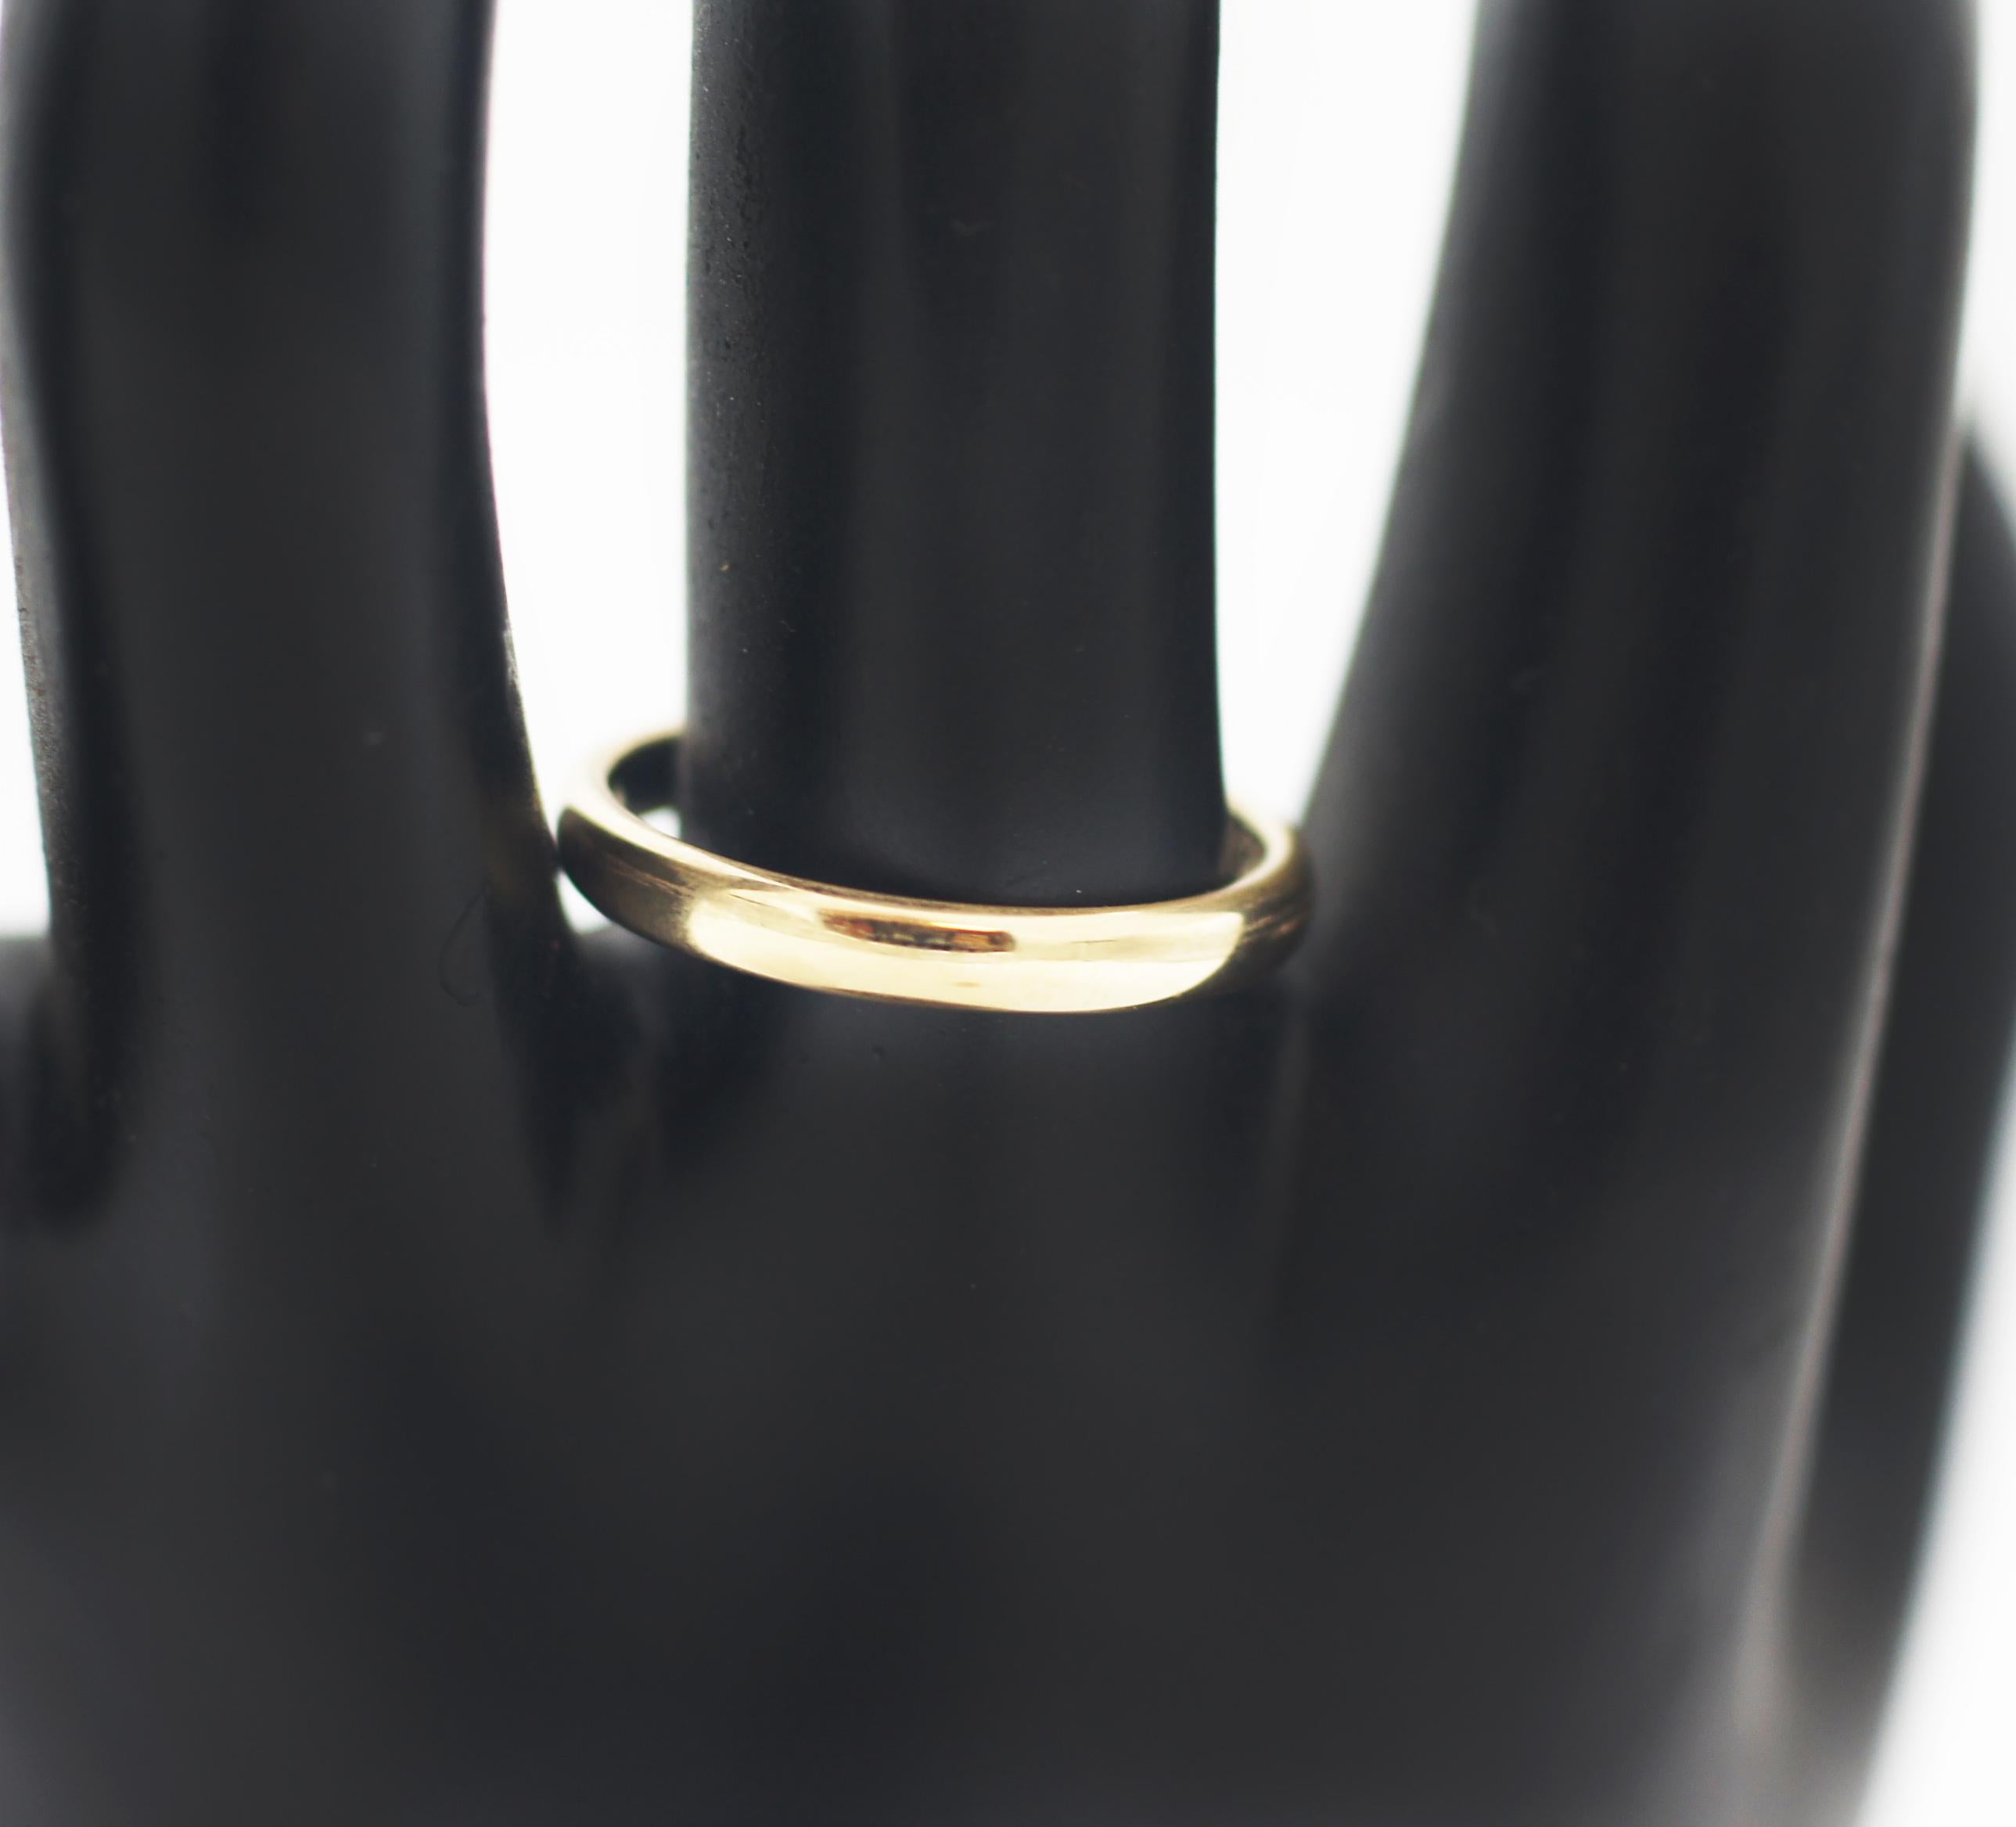 Tiffany & Co.
Classic Wedding Ring
18K Gold
Size 8.5
Internat Diameter 18.5mm
Hallmarked: (c) Tiffany & Co Au750
This beautiful pre-loved ring is in great looking condition. This ring has some wear which is consistent with time and some use such as